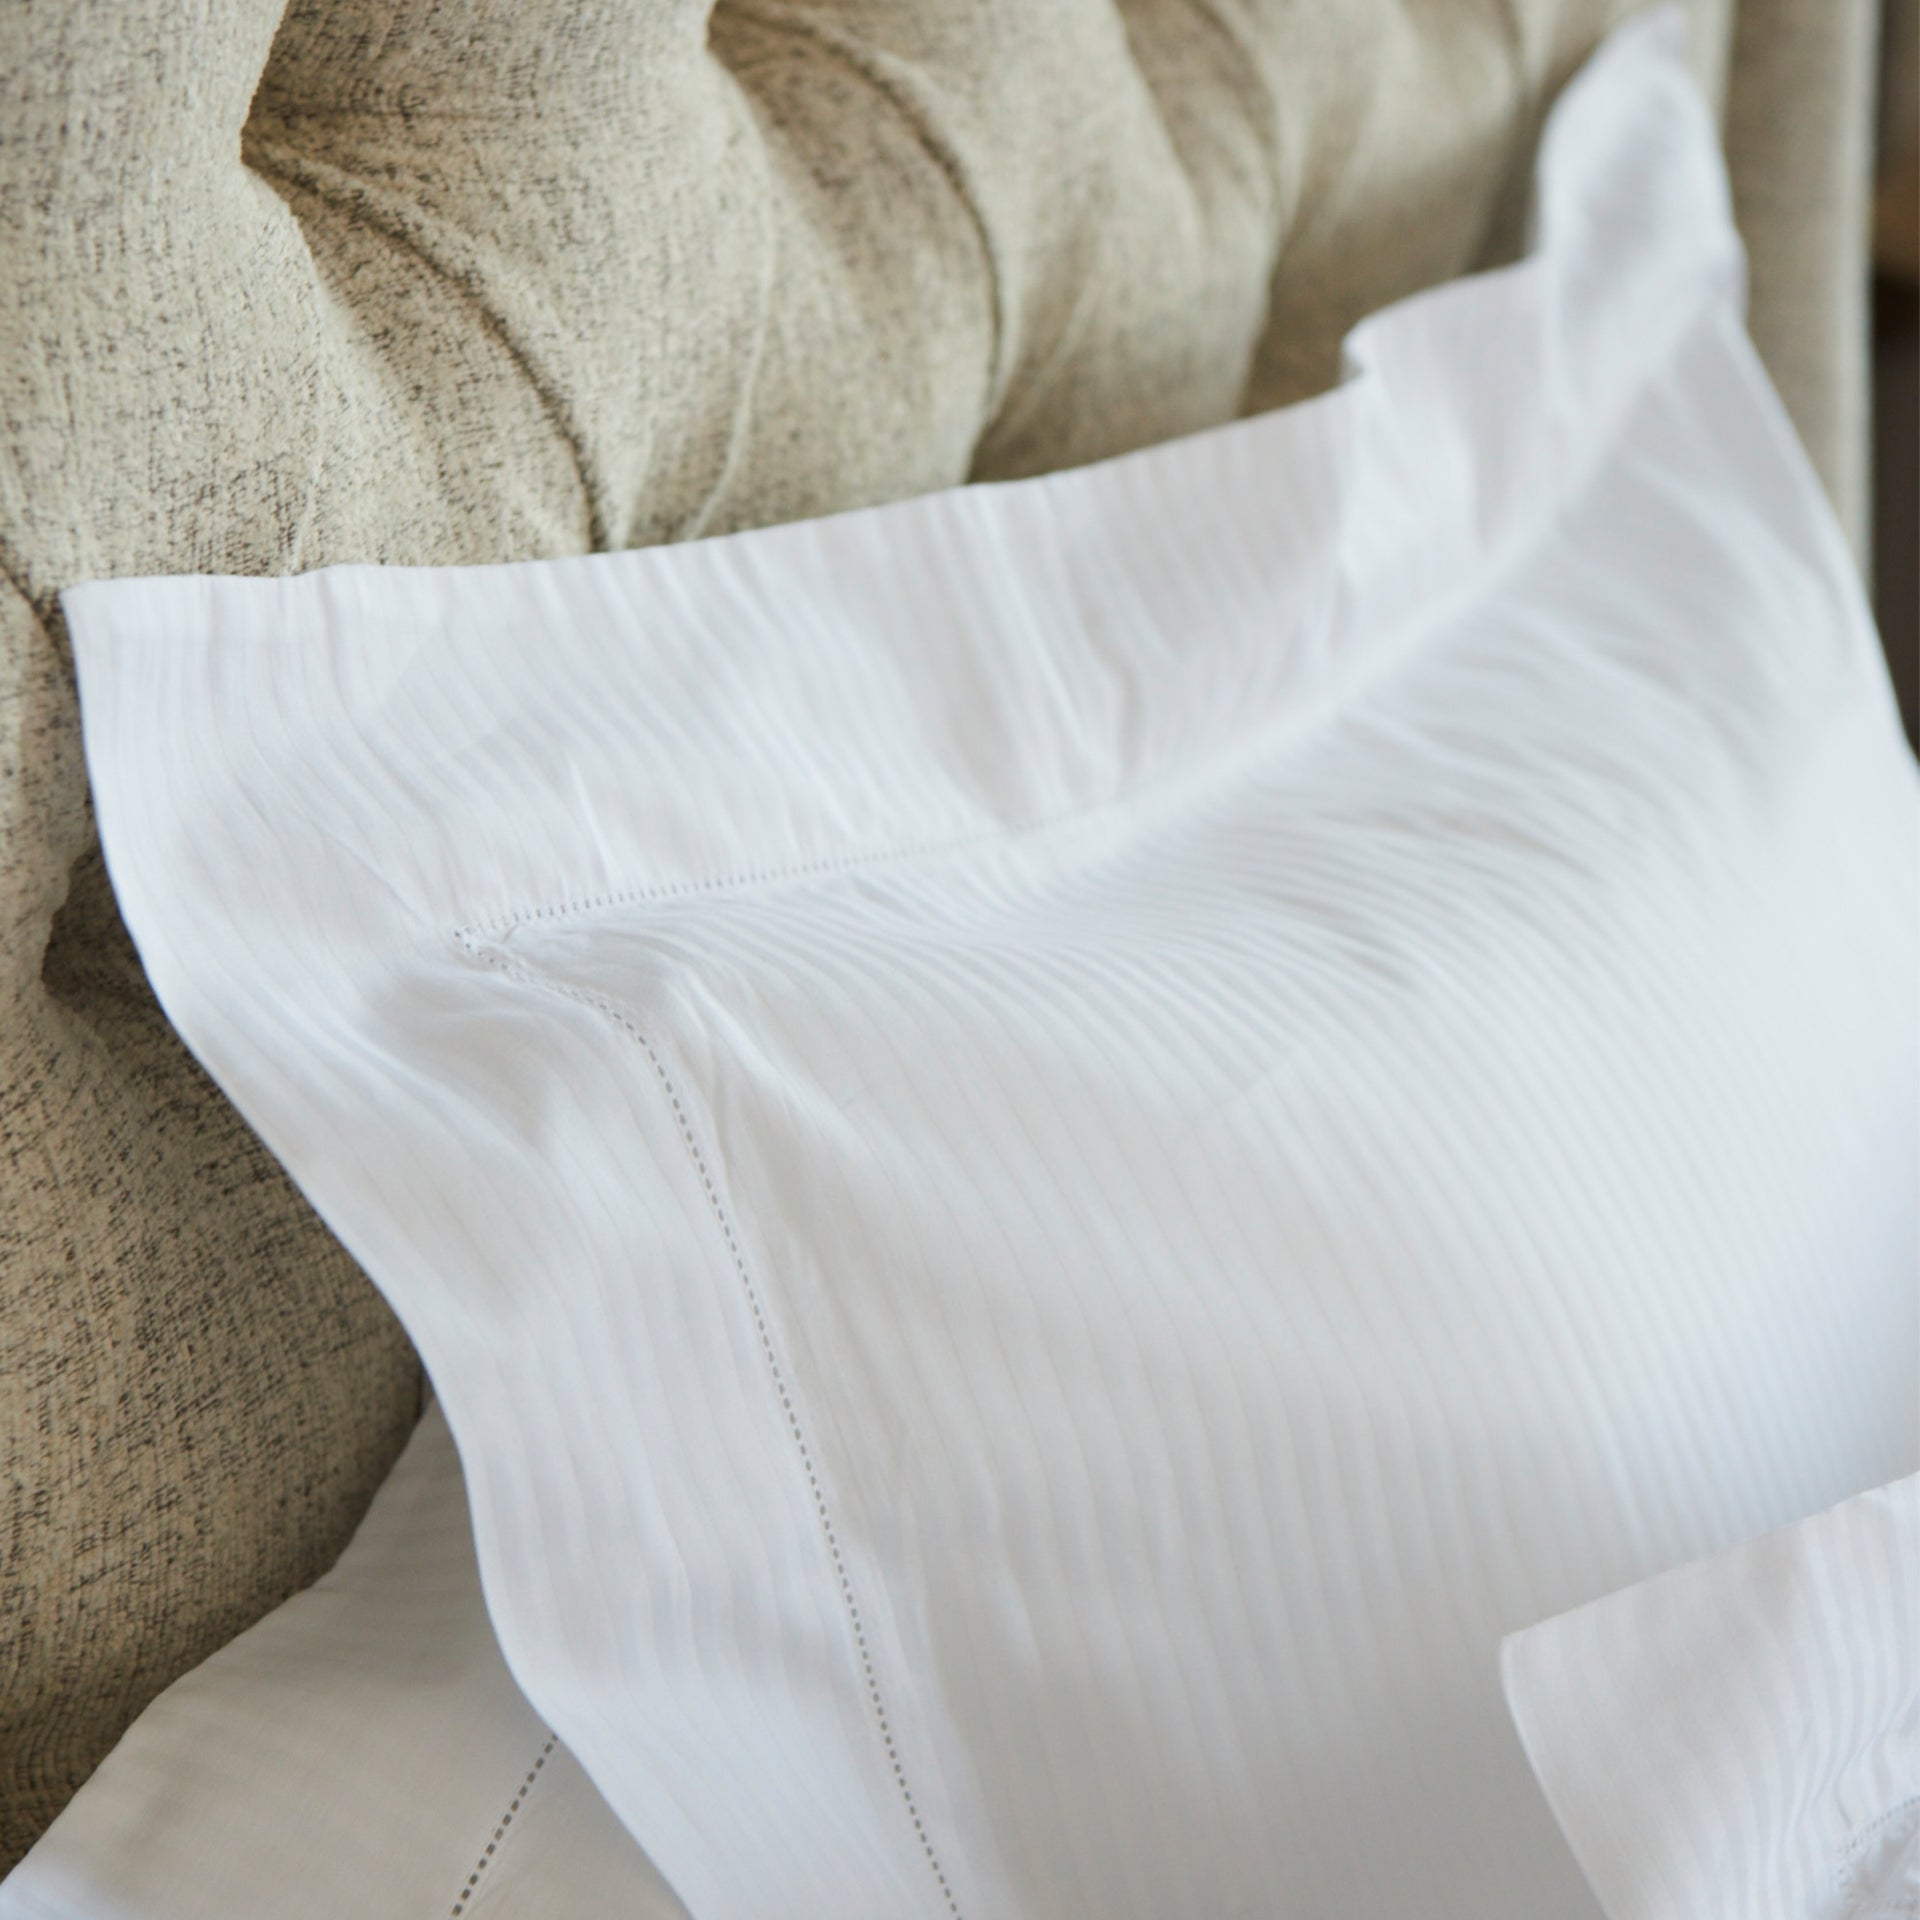 detail close up of the savoia stripe euro pillow sham with the 3 inch hemstitch flange